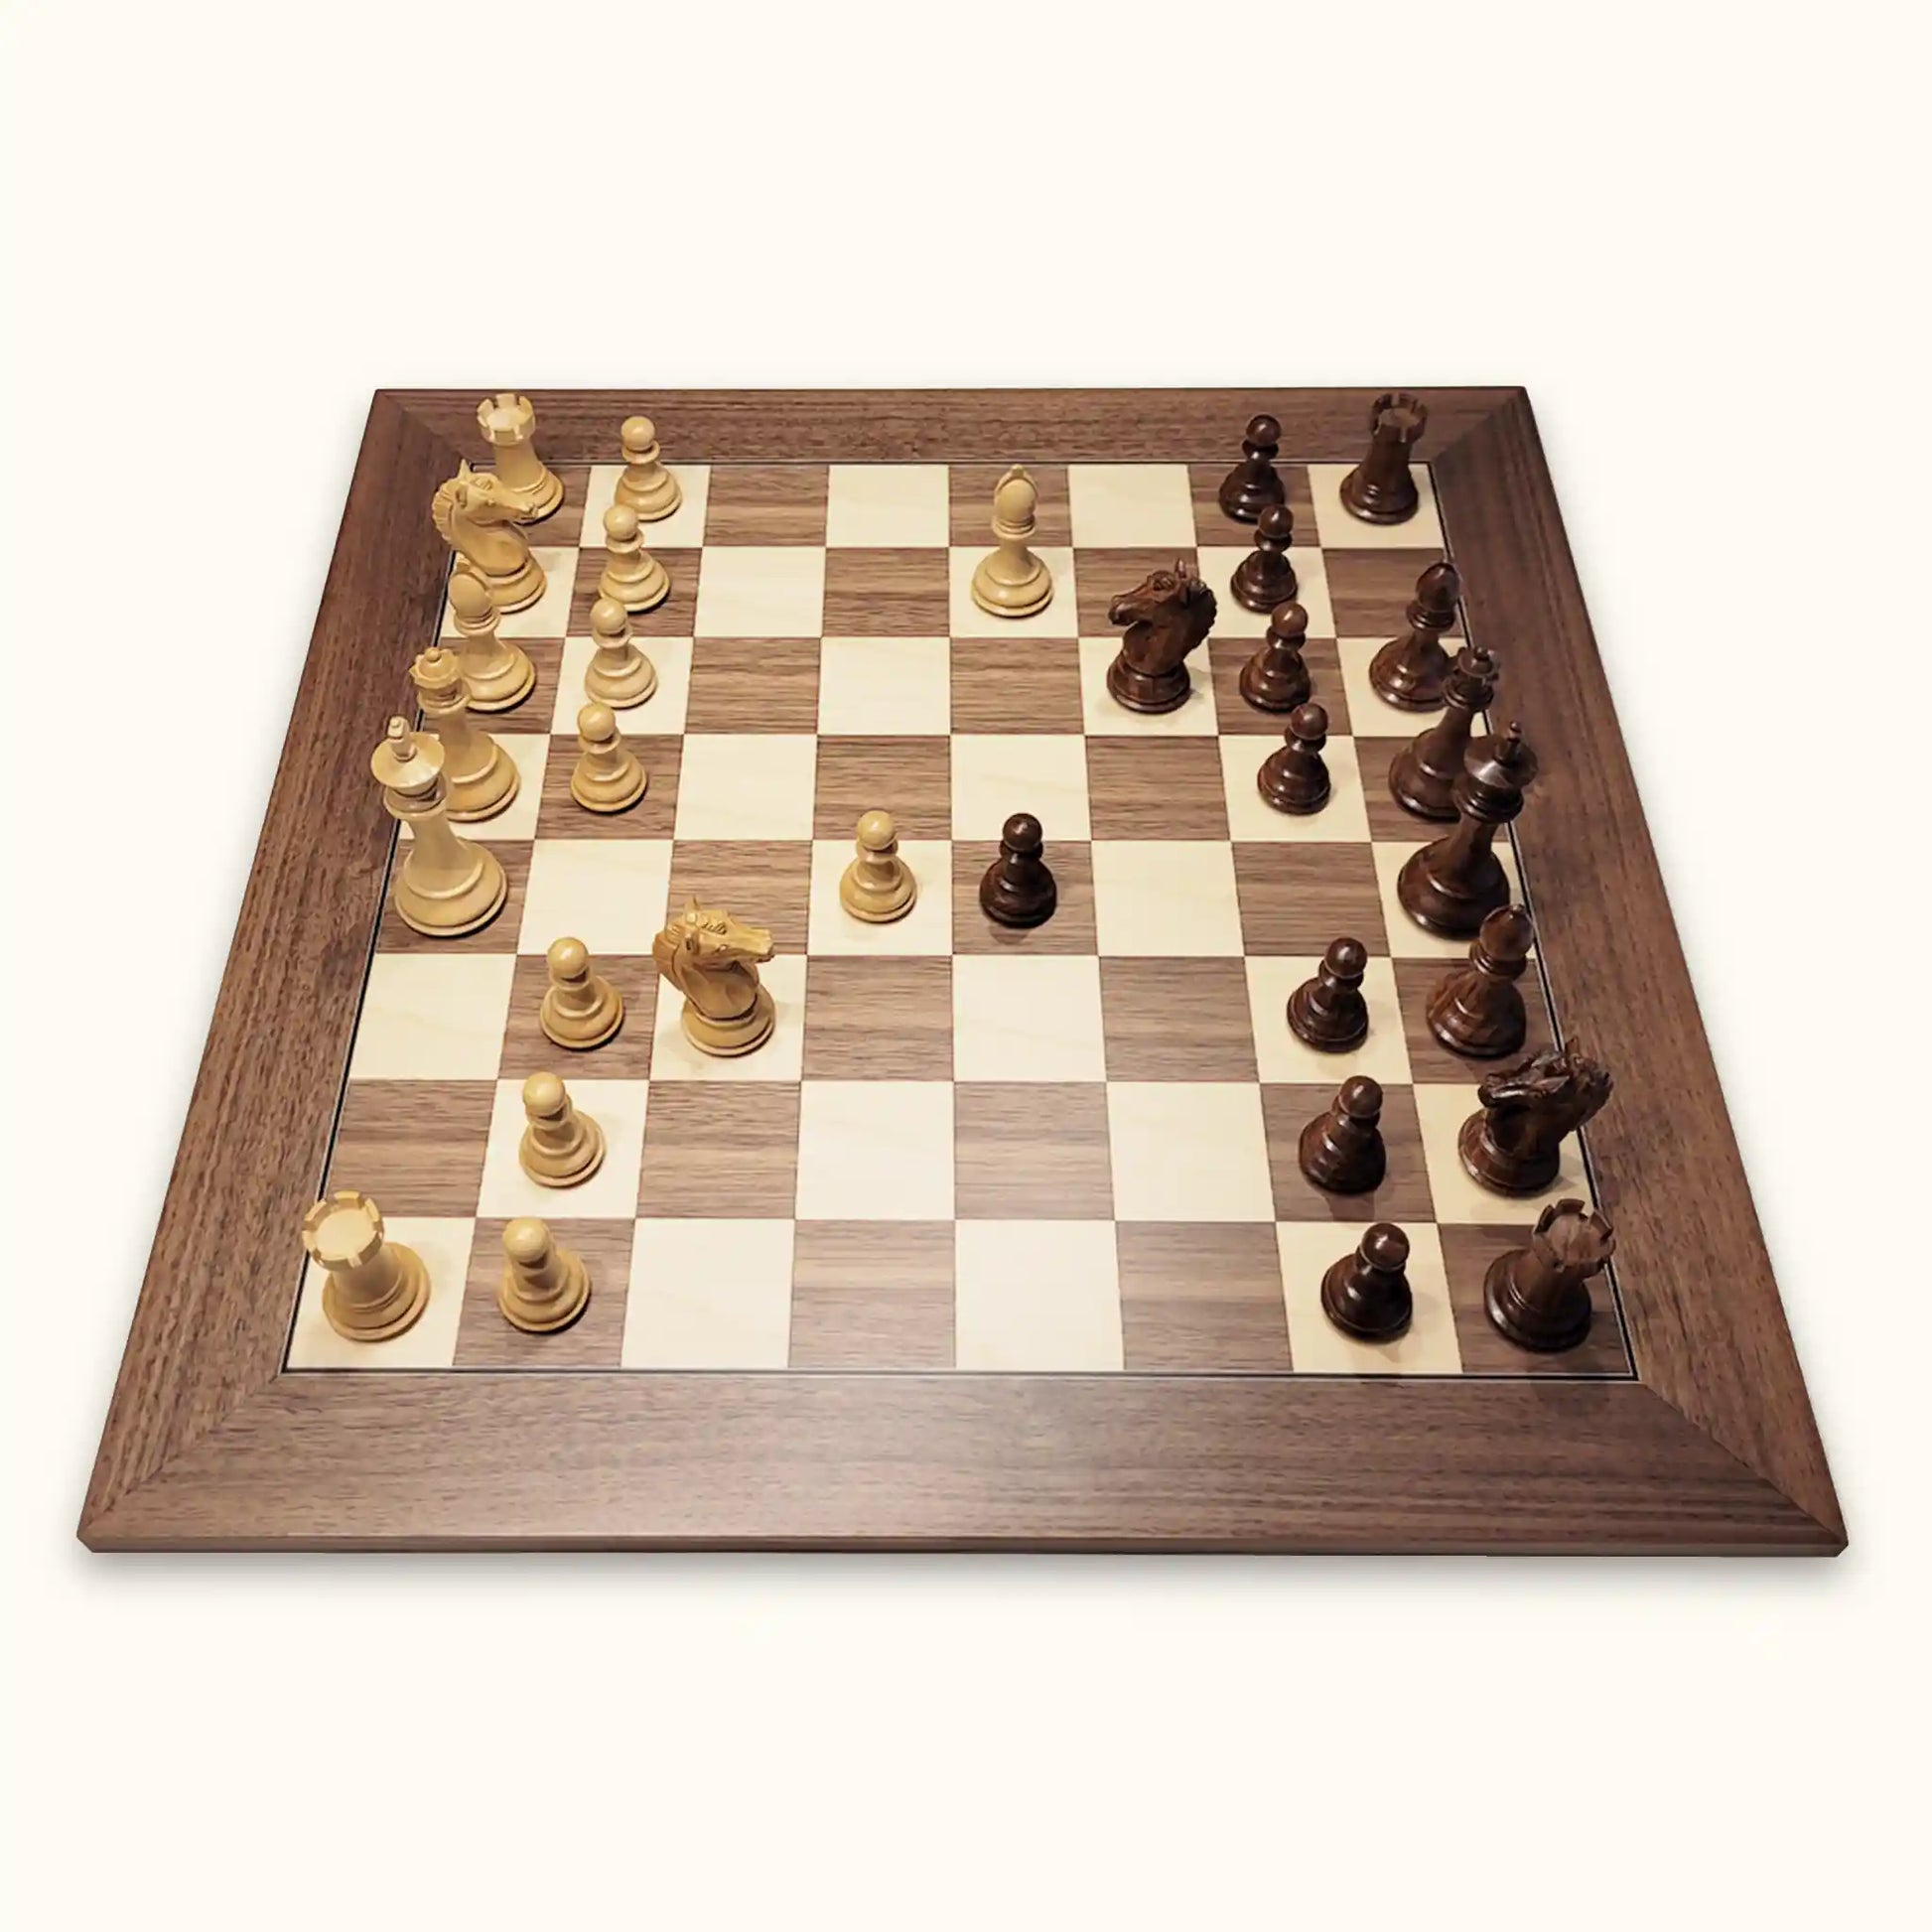 Chess pieces alban knight palisander on walnut chessboard side